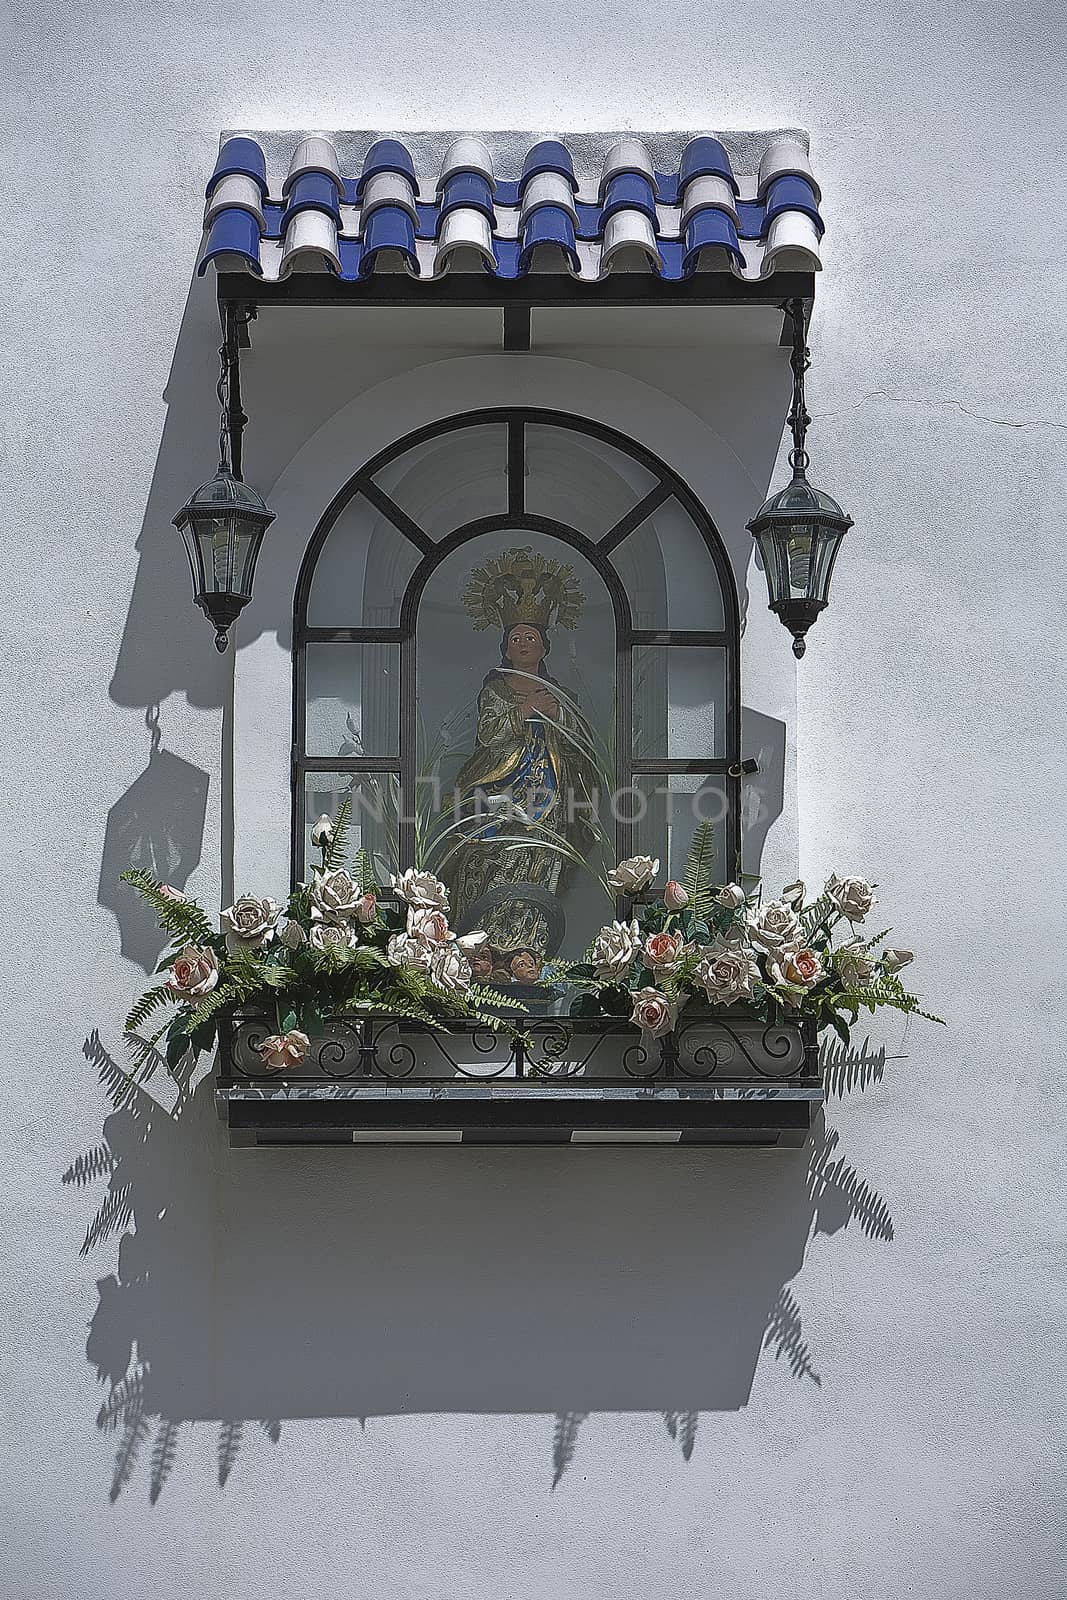 Small altarpiece of a virgin in the street, typical of the street in Osuna, Sevilla province, Andalusia, Spain